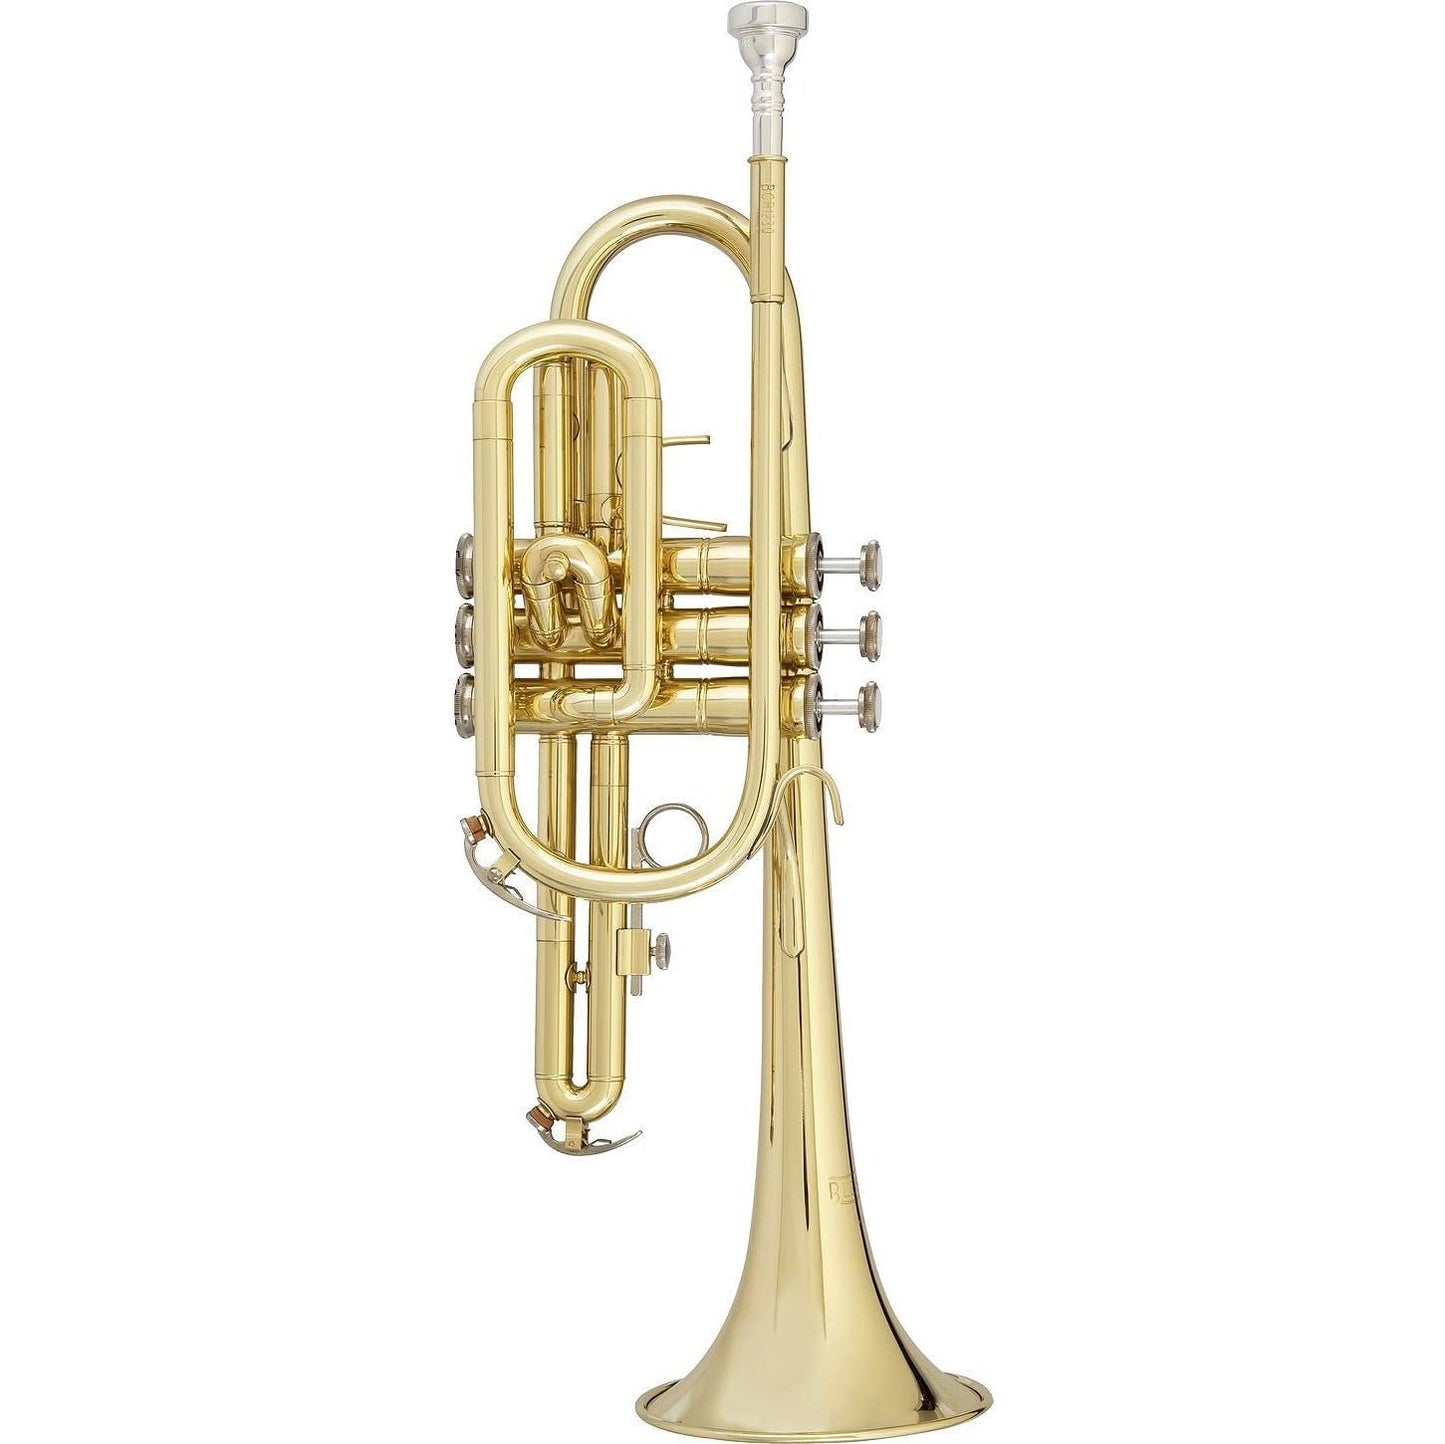 Blessing BCR-1230 Student Cornet - Lacquered Brass